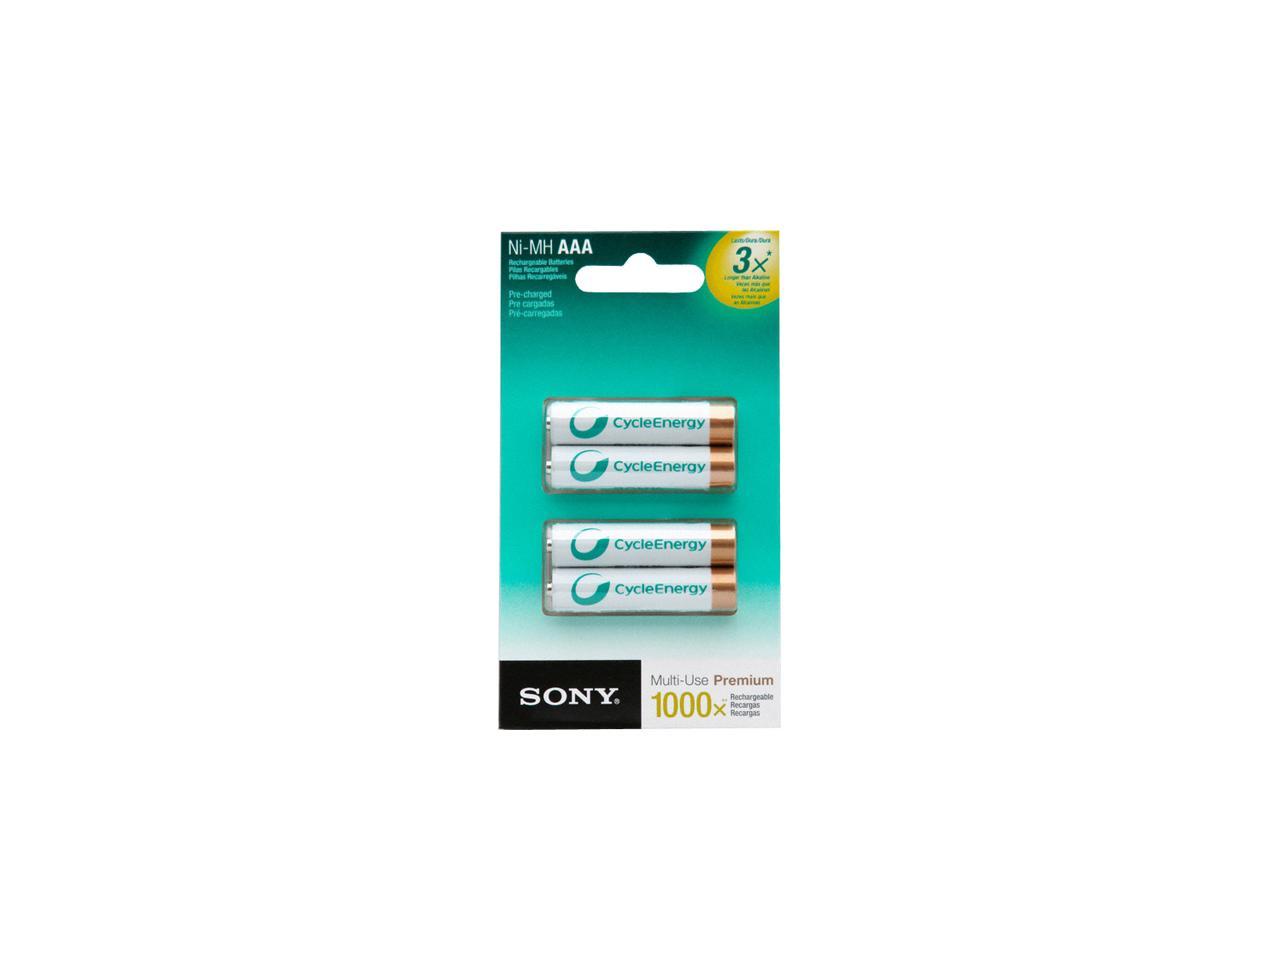 Sony NH-AAA-B4KN 800mAh Cycle Energy AAA Ni-Mh Rechargeable Batteries (Pack of 4)